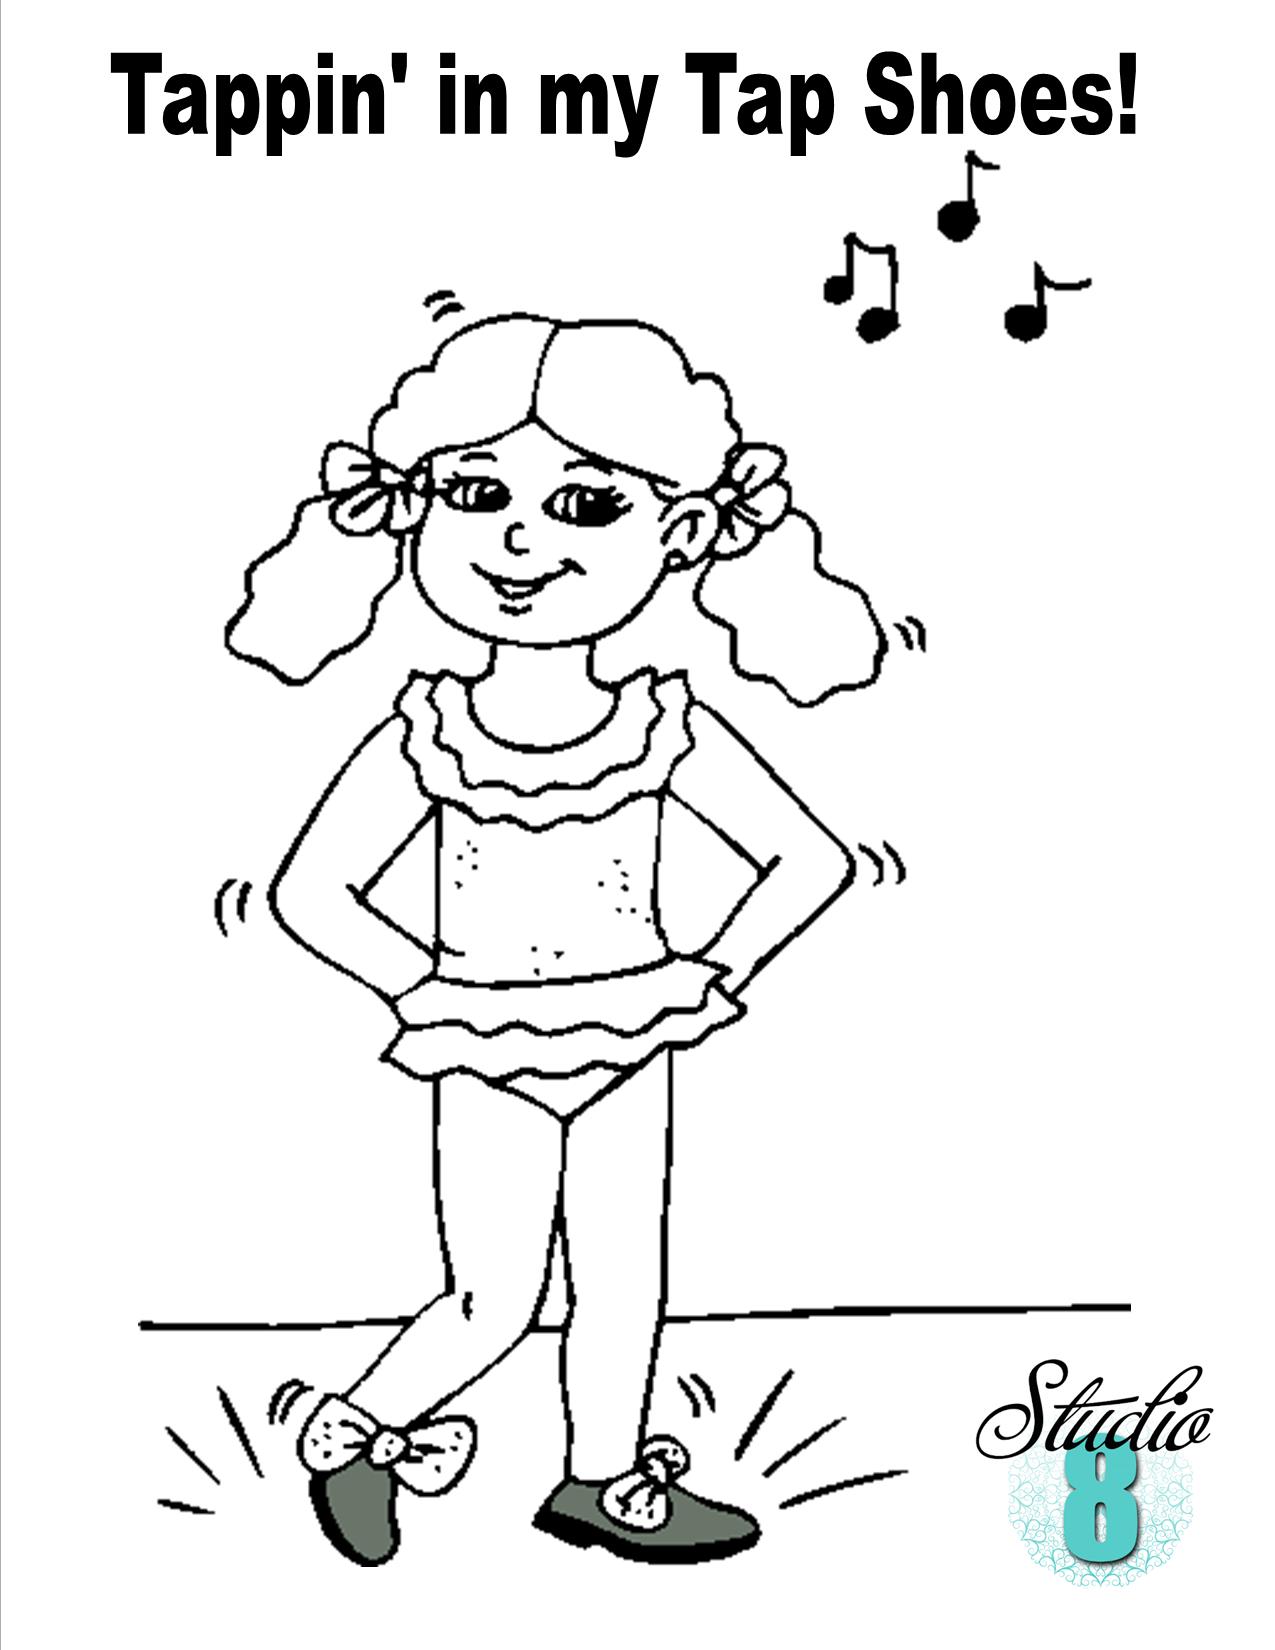 Tappin in Tap Shoes - Tap Dance Coloring Pages